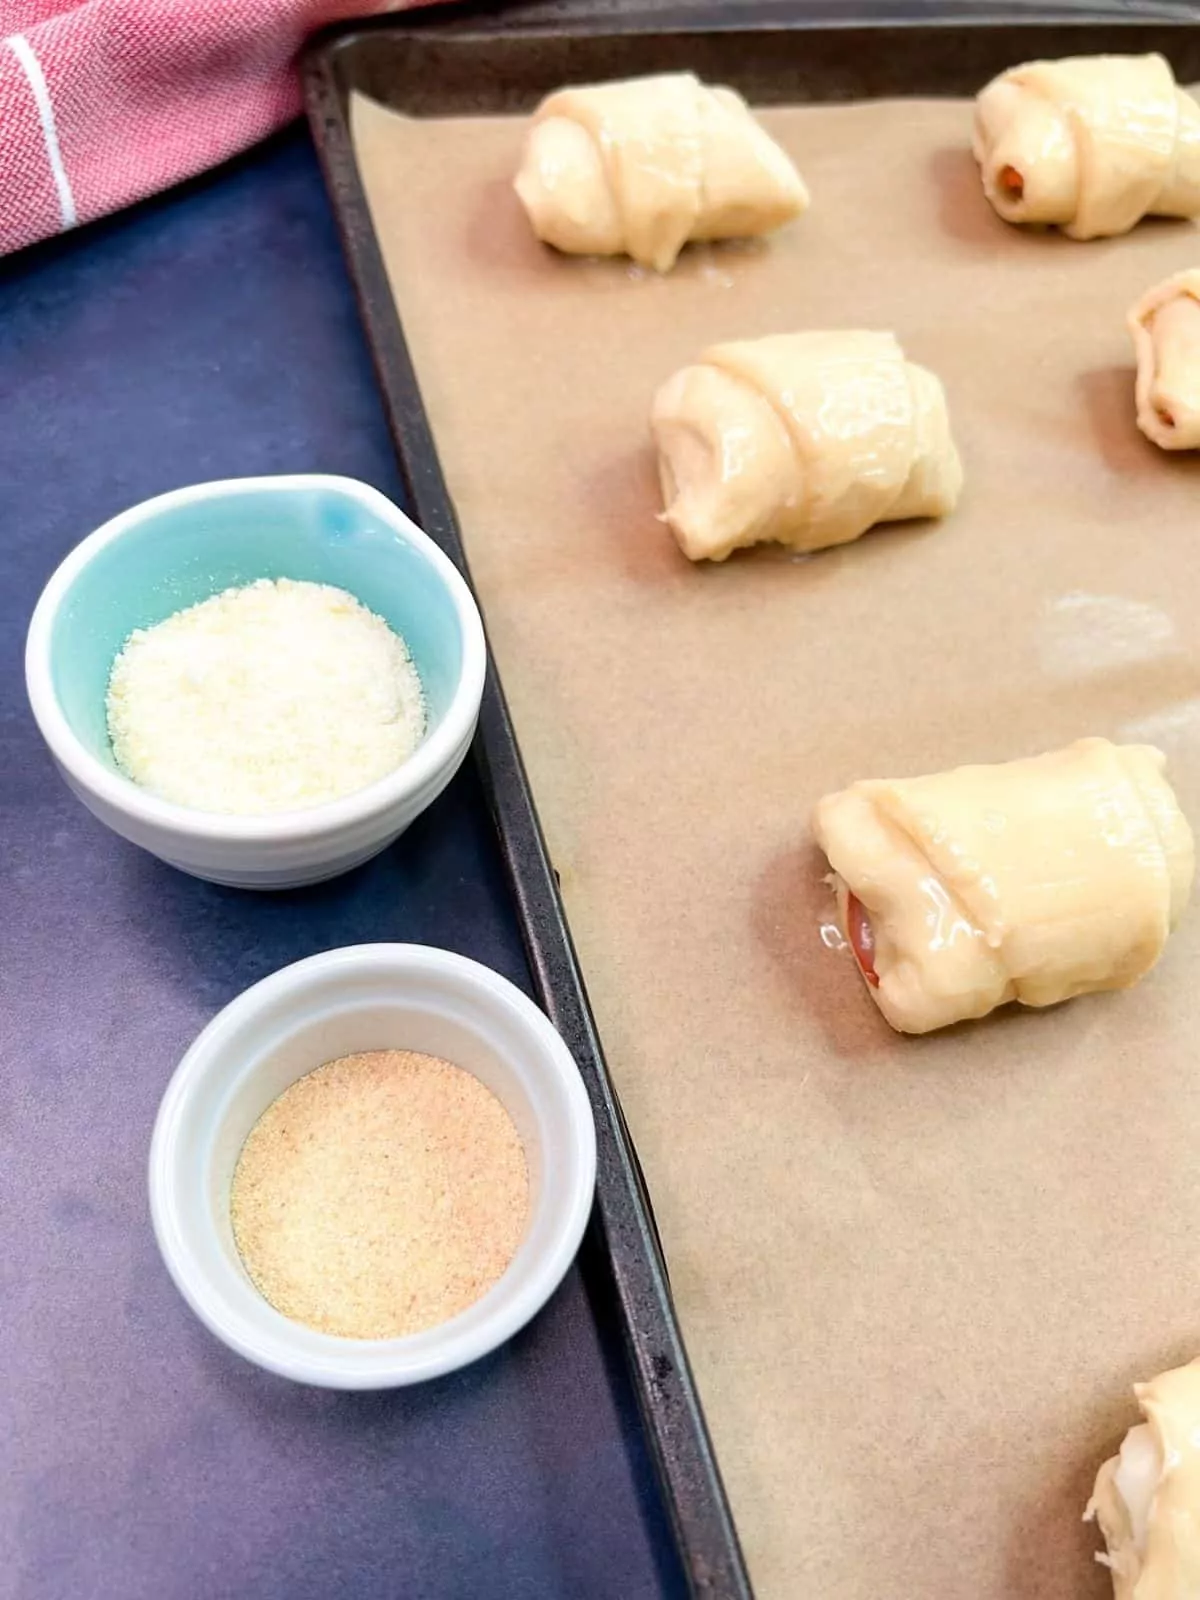 raw crescent rolls on baking sheet with parchment paper. Two small bowls with Parmesan cheese and garlic powder.